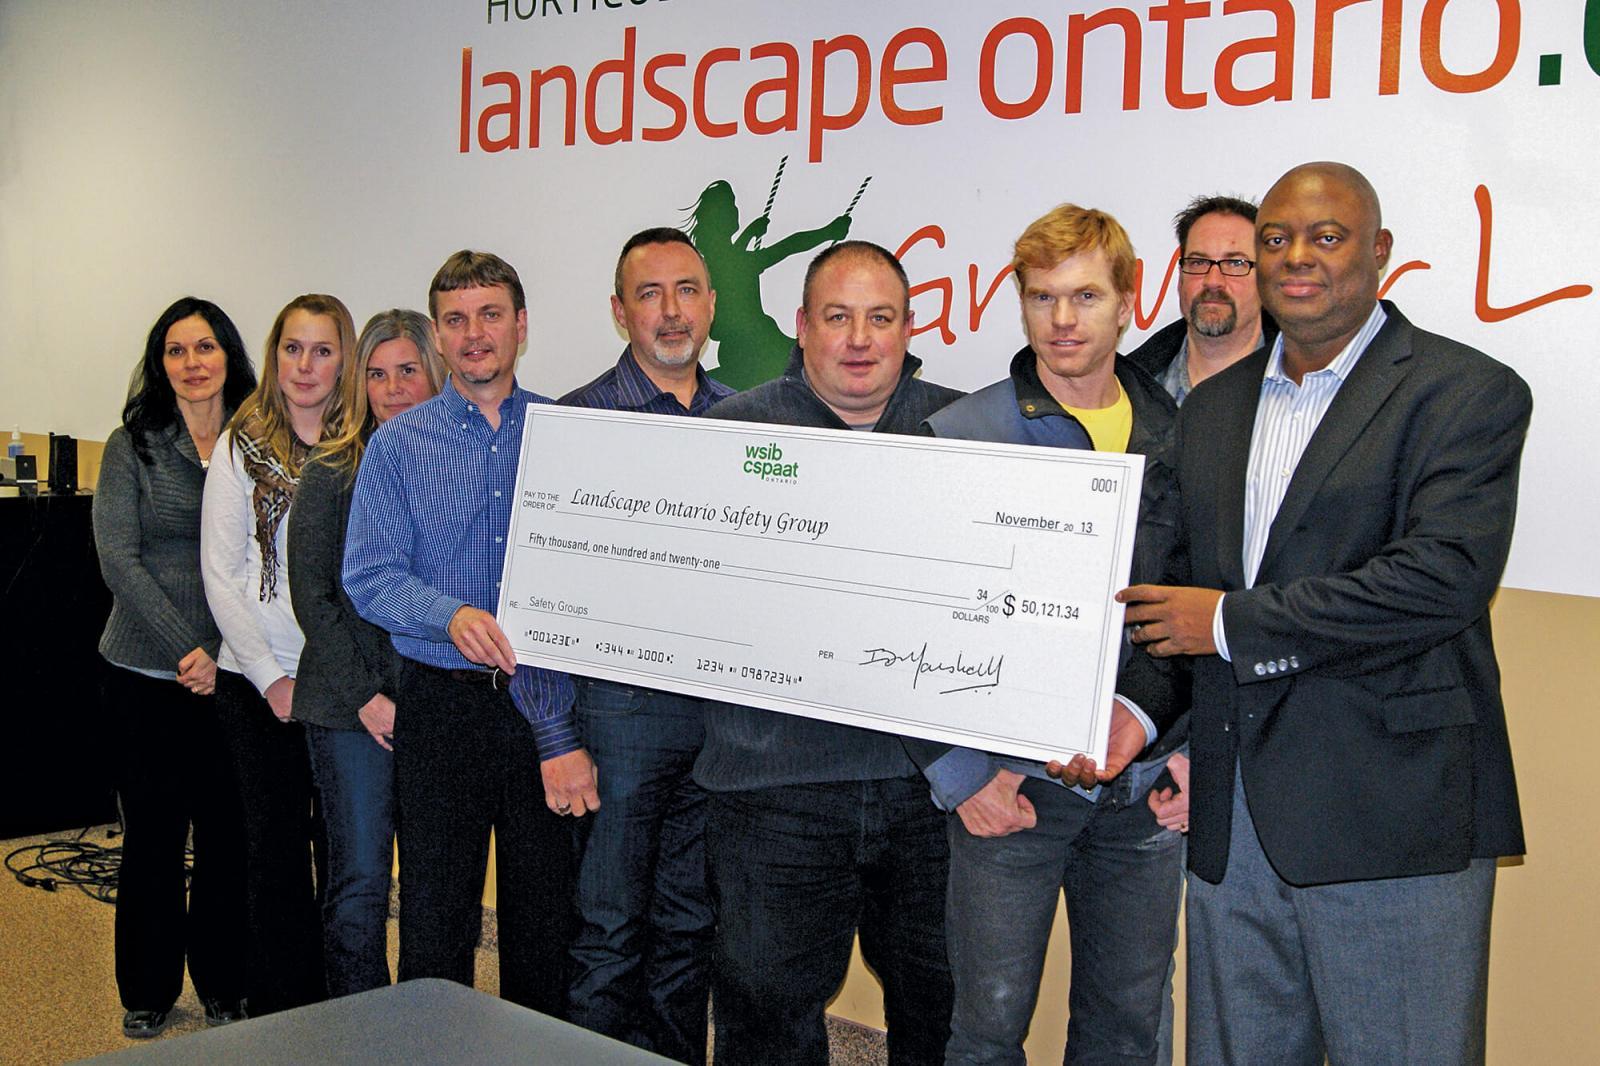 A few members of the Landscape Ontario Safety Group were on hand Nov. 22 to accept a cheque for over $50,000, which was divided among the member companies.